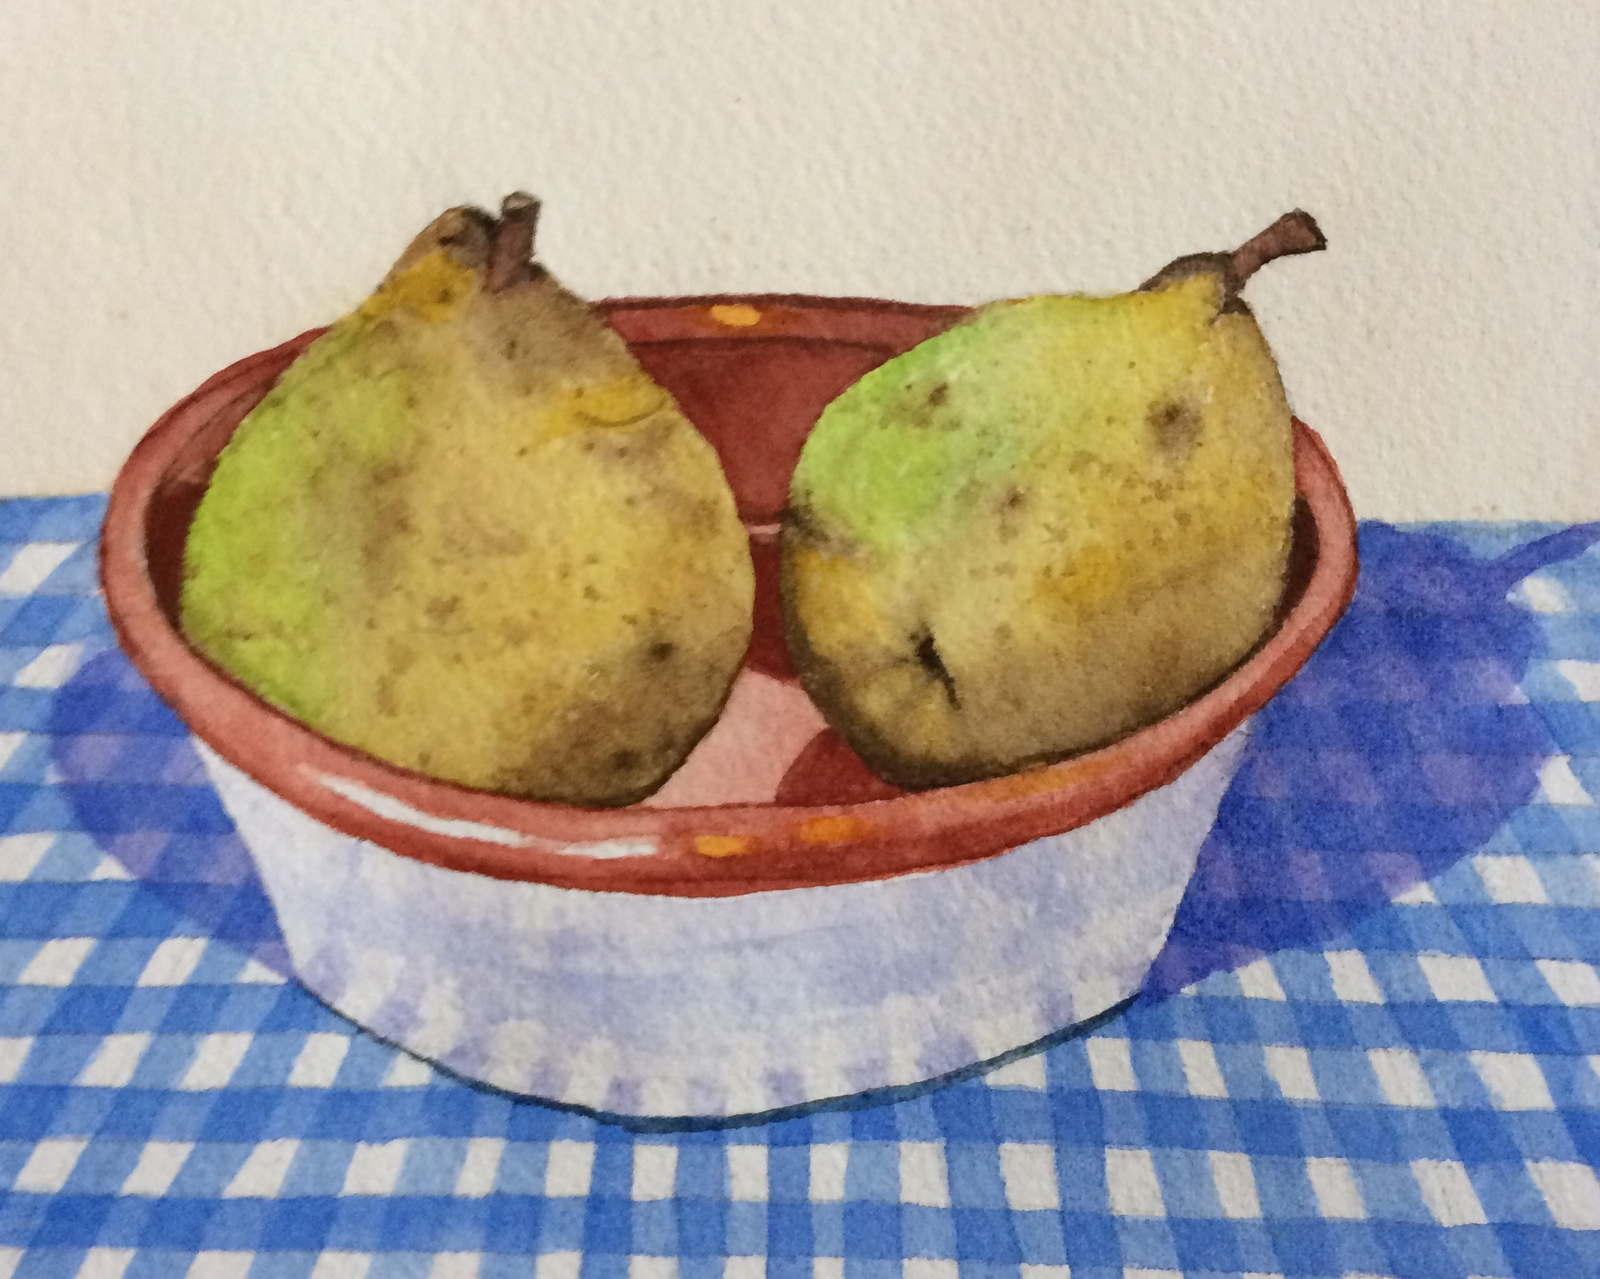 Pears ripening - sold